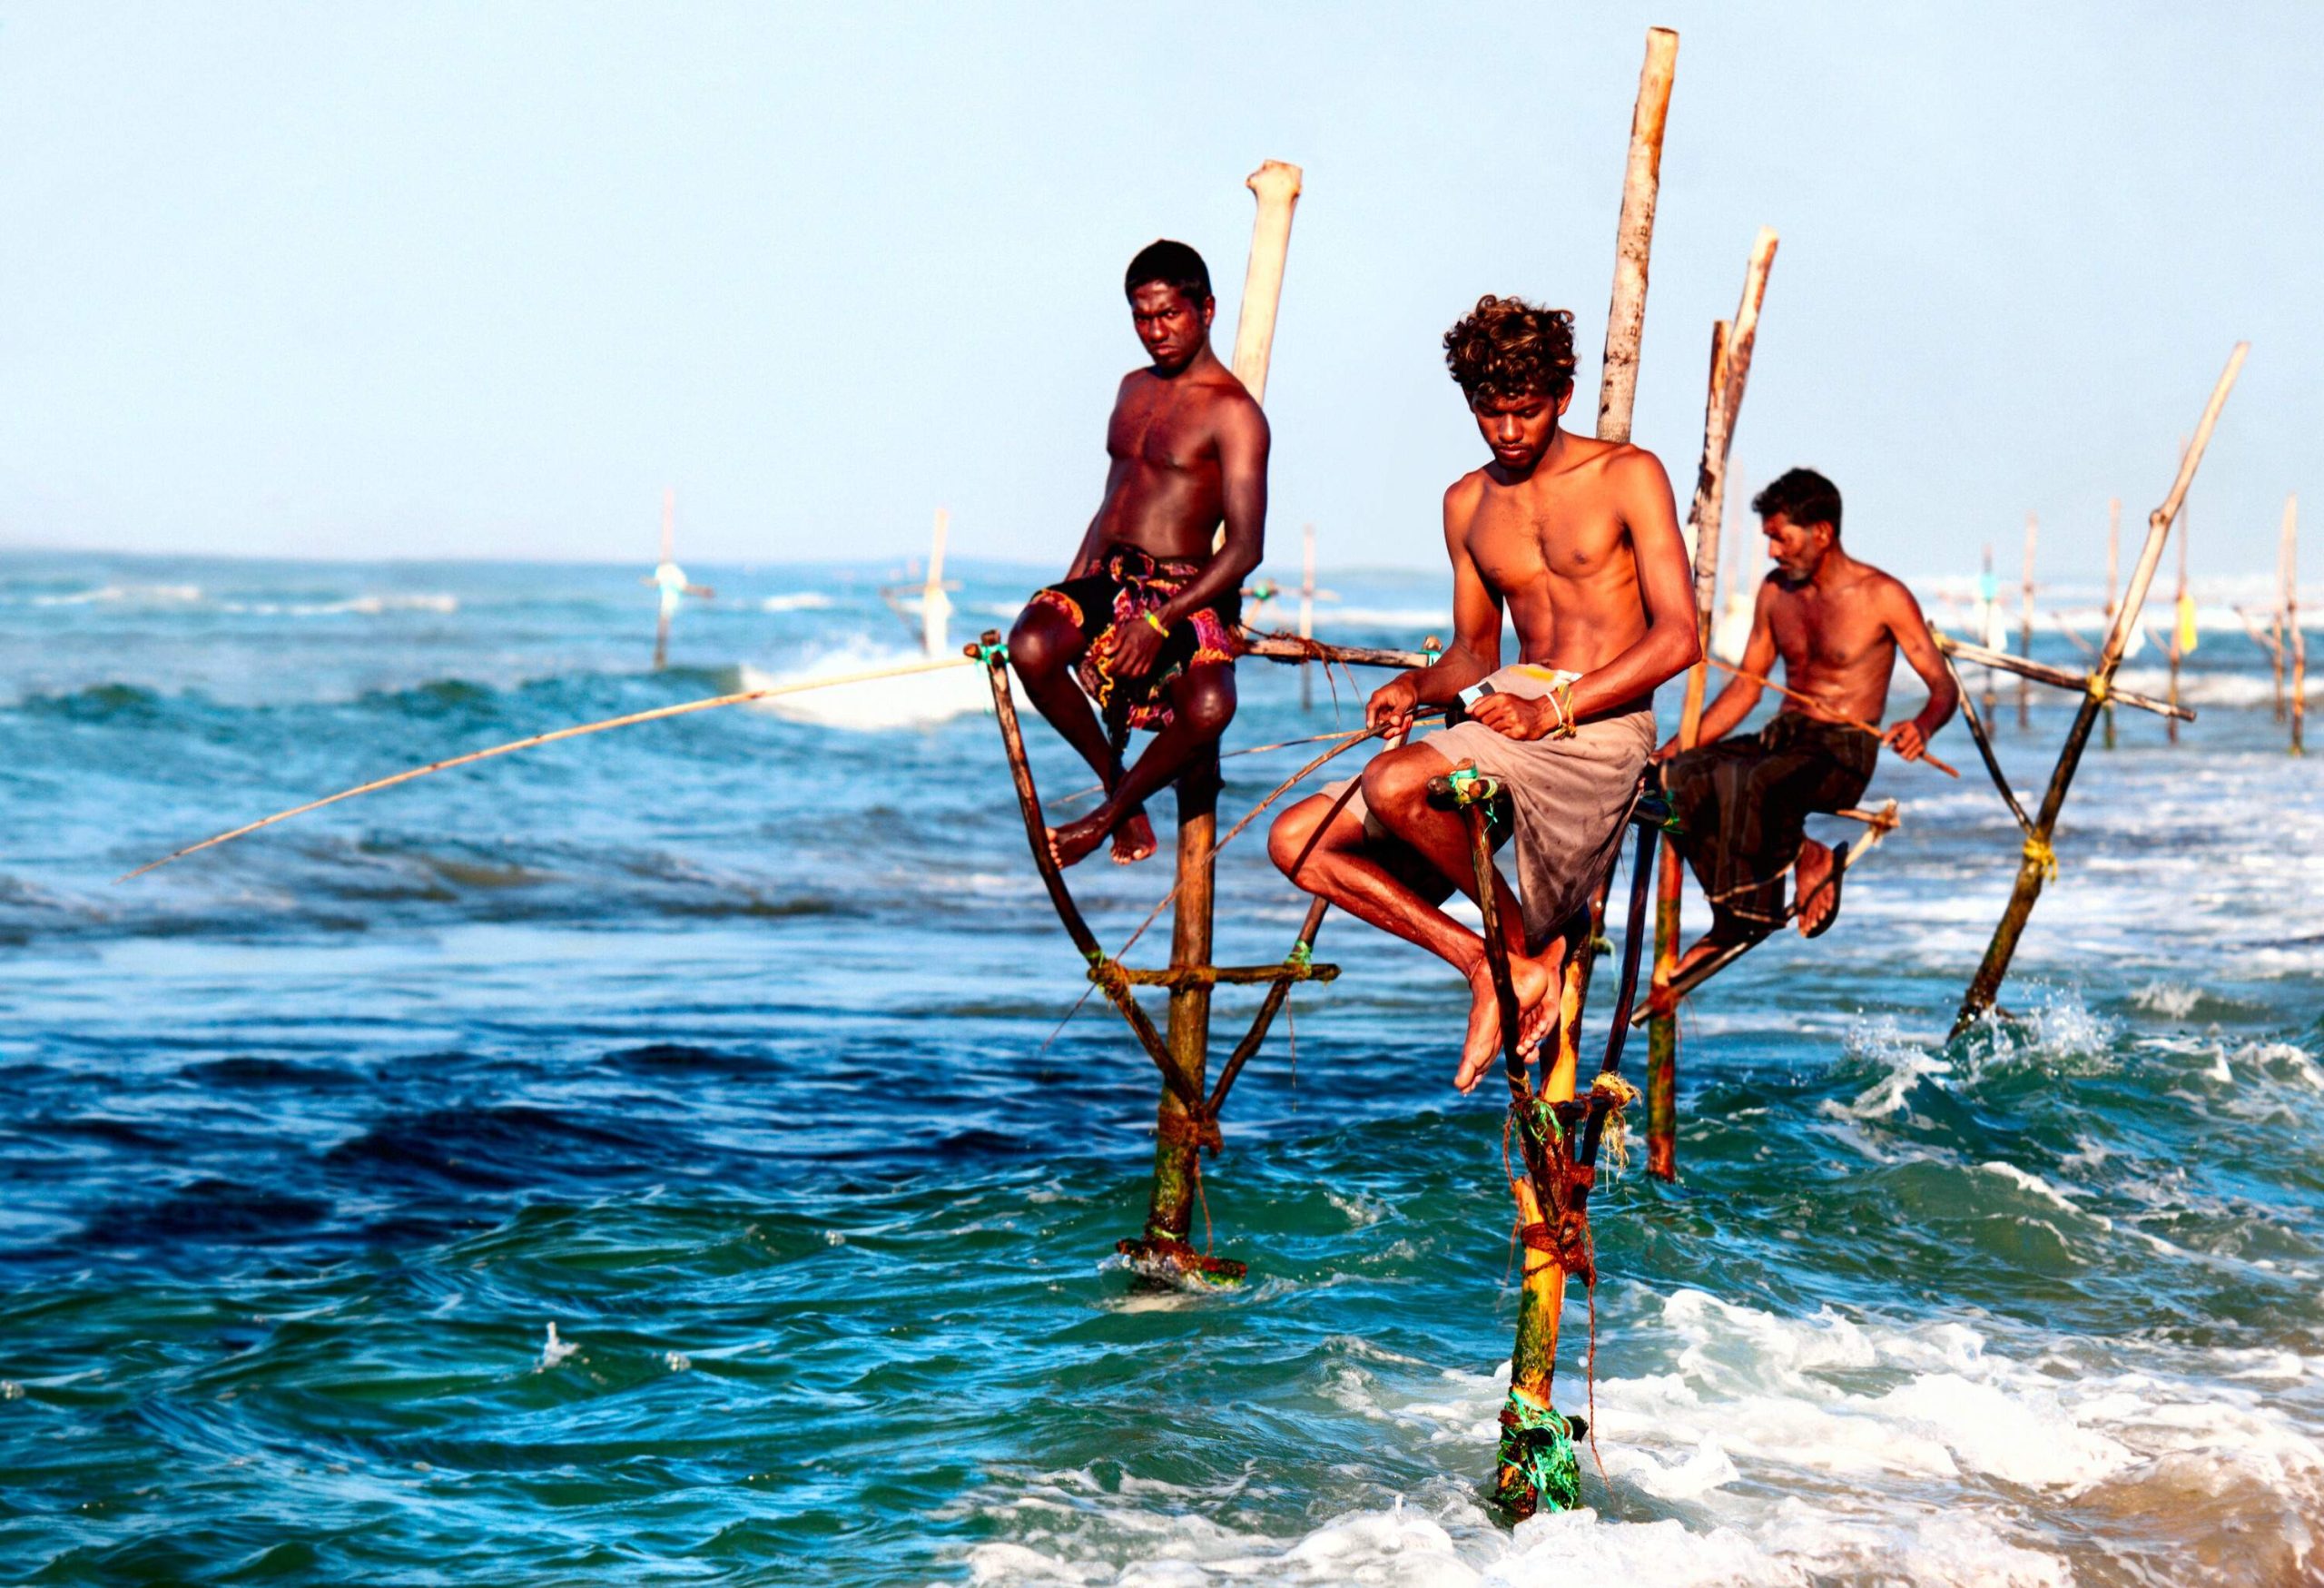 Fishermen perched on stilts, patiently fishing above the water's surface.